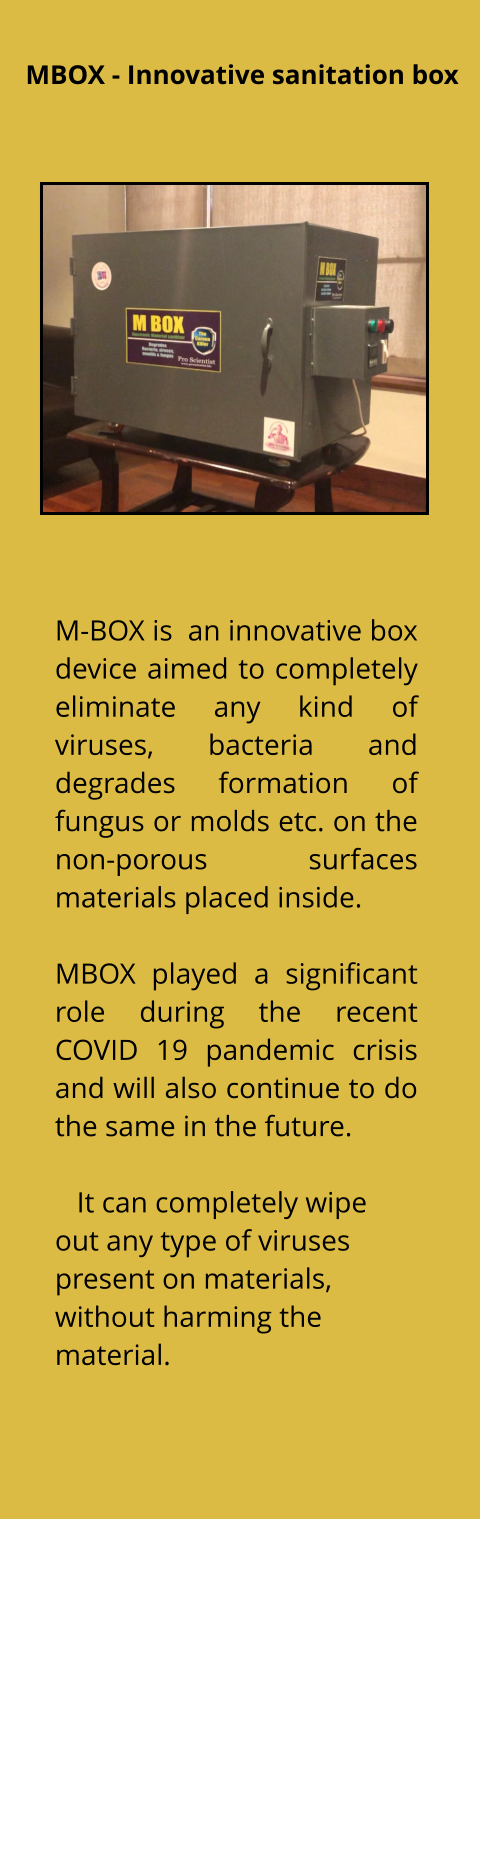 M-BOX is  an innovative box device aimed to completely eliminate any kind of viruses, bacteria and  degrades formation of fungus or molds etc. on the non-porous surfaces materials placed inside.   MBOX played a significant role during the recent COVID 19 pandemic crisis and will also continue to do the same in the future.      It can completely wipe out any type of viruses present on materials, without harming the material.   MBOX - Innovative sanitation box